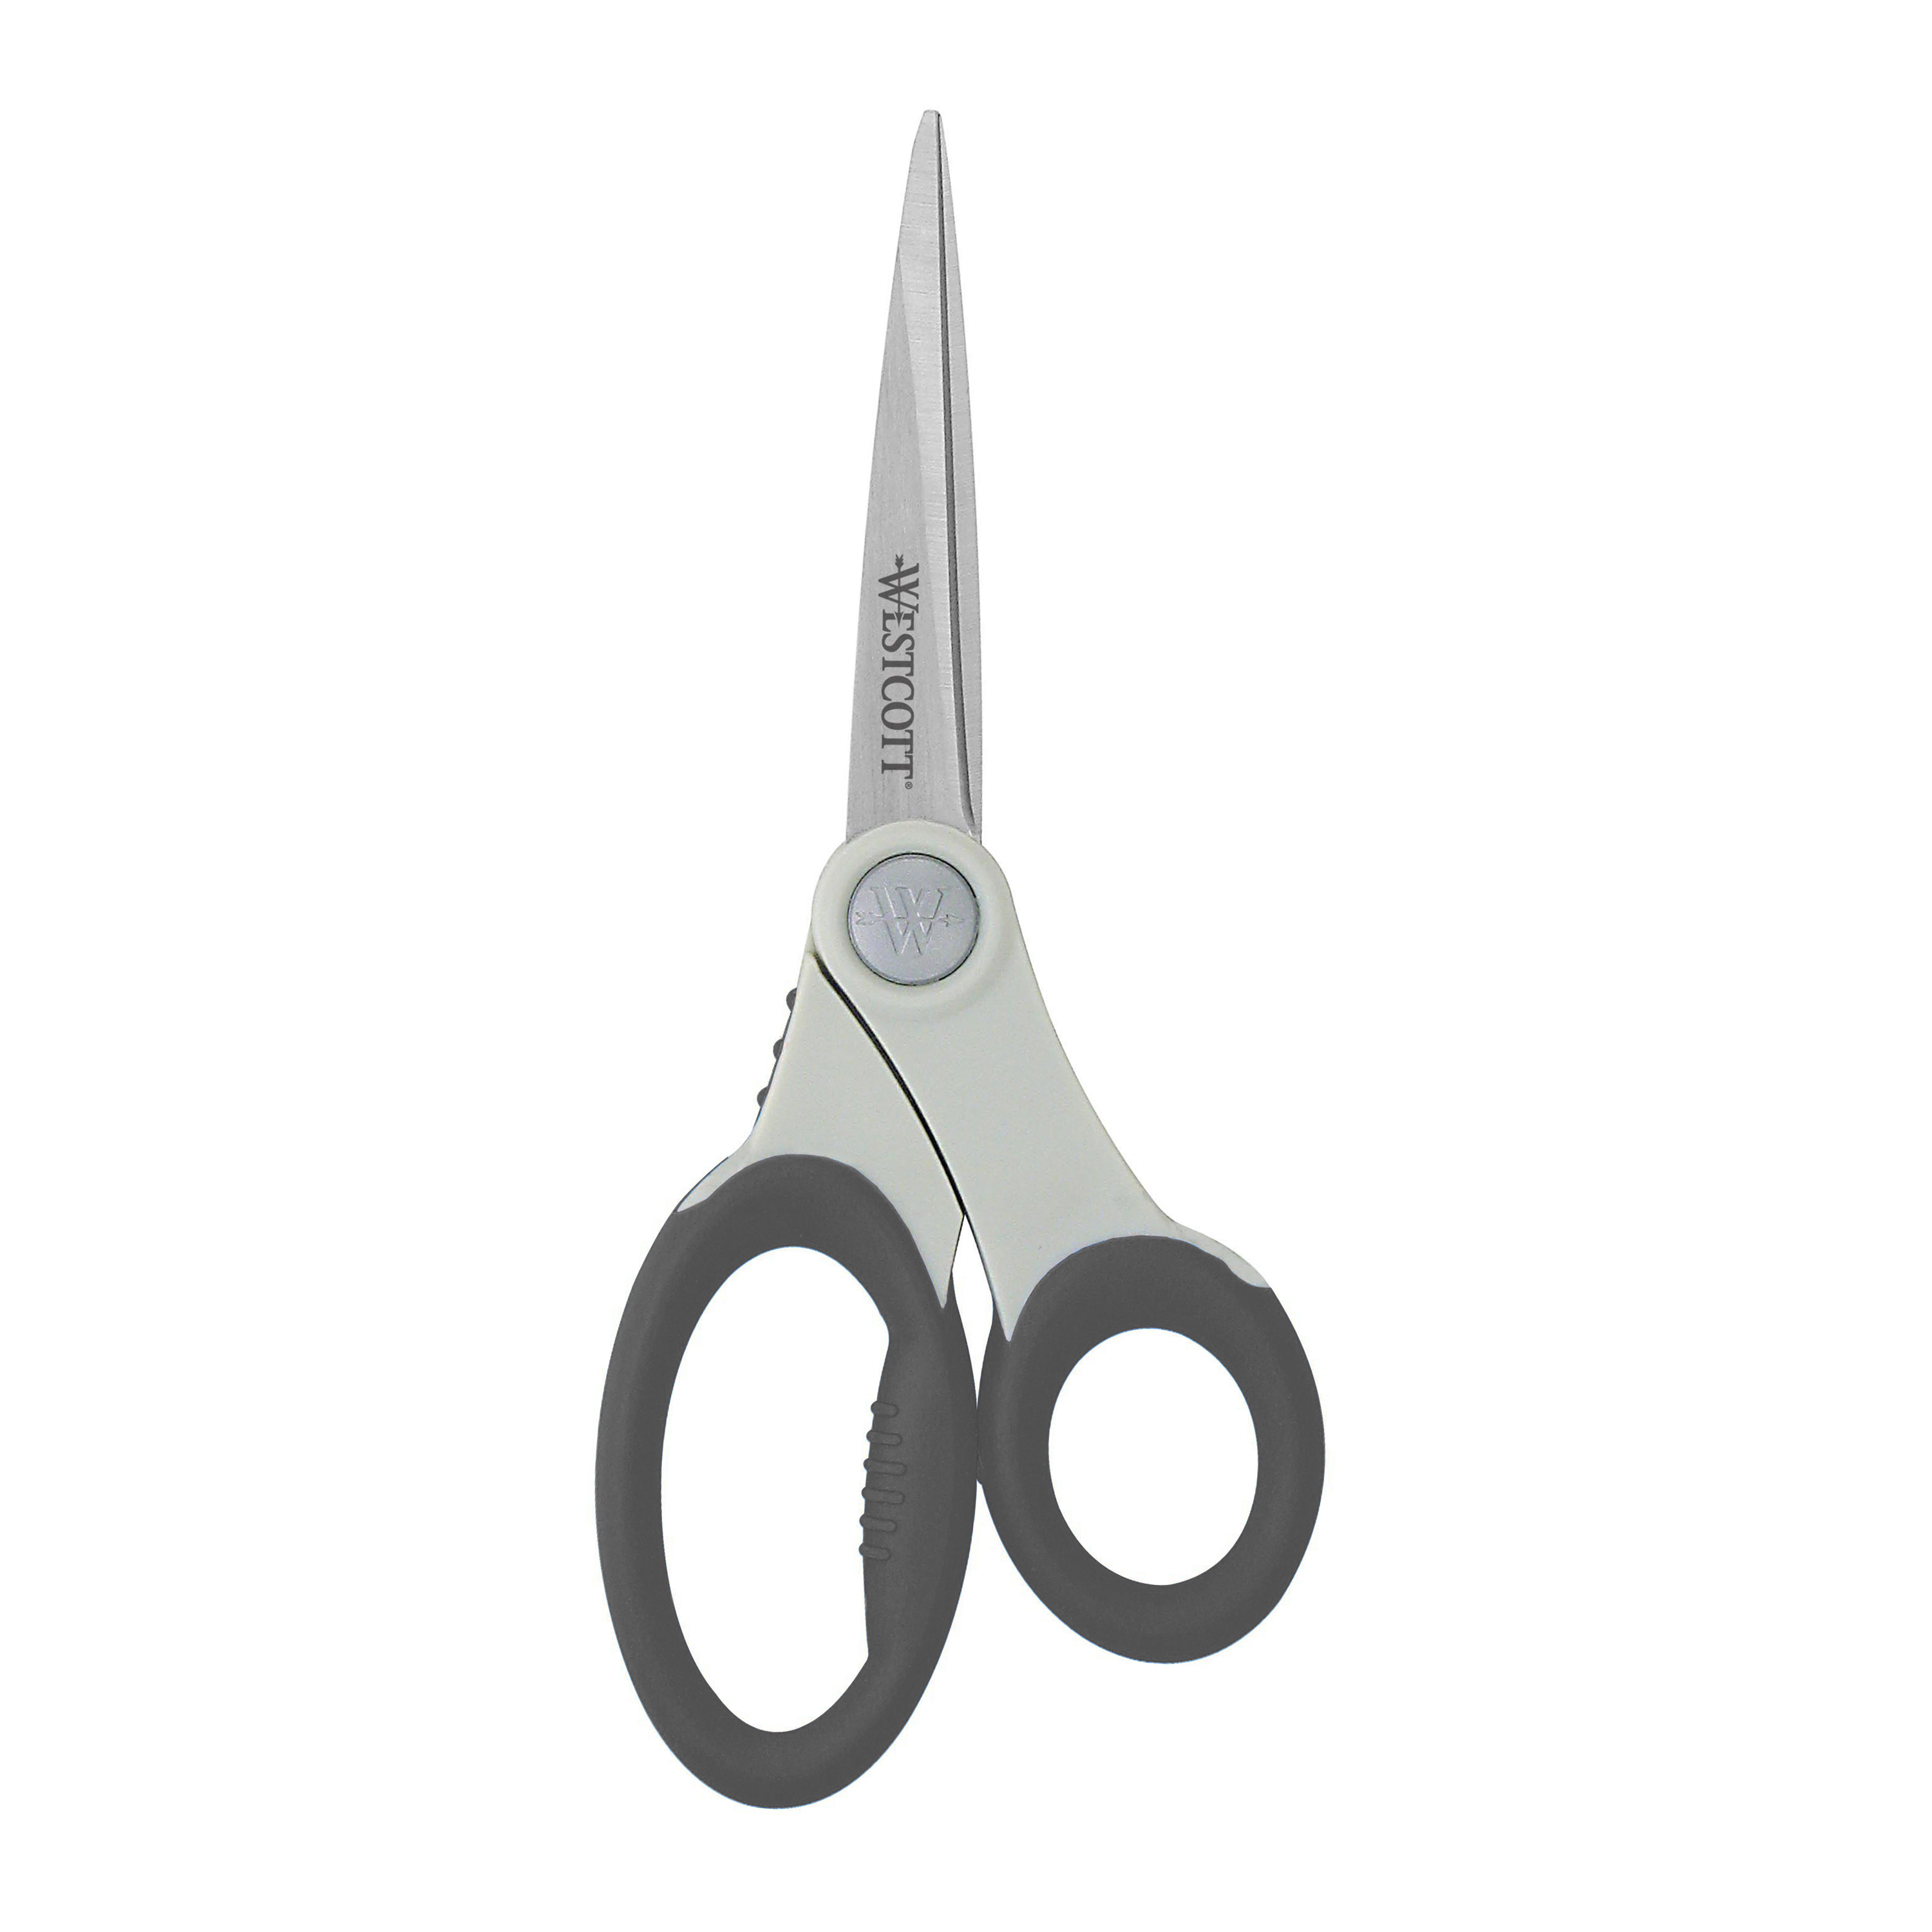 Westcott 8" Straight Anti-microbial Scissors, Assorted Colors (14647)